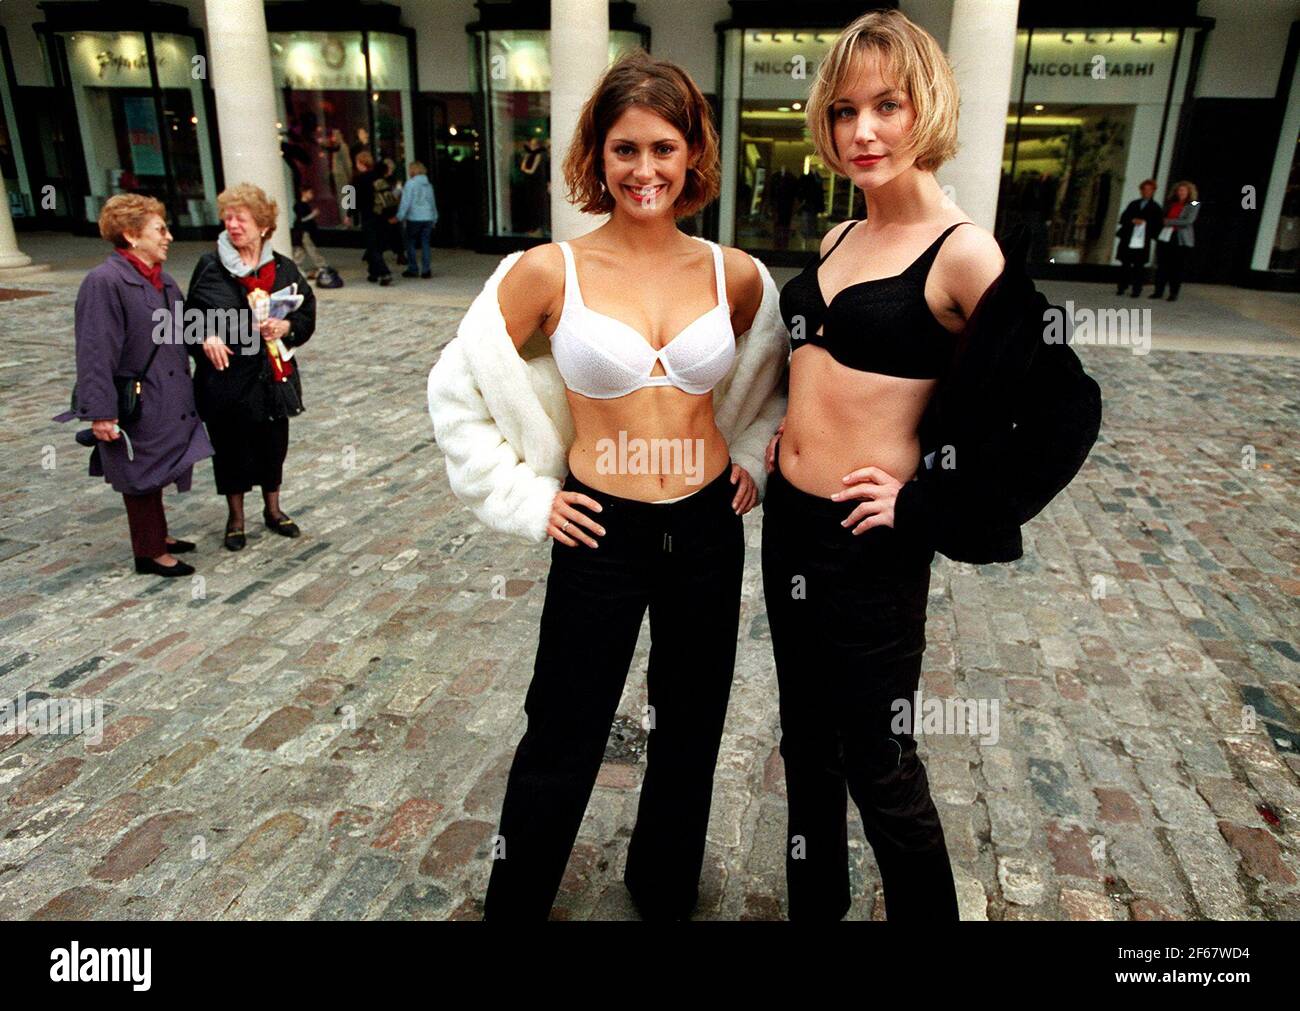 https://c8.alamy.com/comp/2F67WD4/two-girls-model-the-new-bioform-bra-from-charnos-created-by-designers-seymour-powell-the-design-of-the-bra-will-apparently-revolutionise-the-way-bras-have-been-previously-made-2F67WD4.jpg